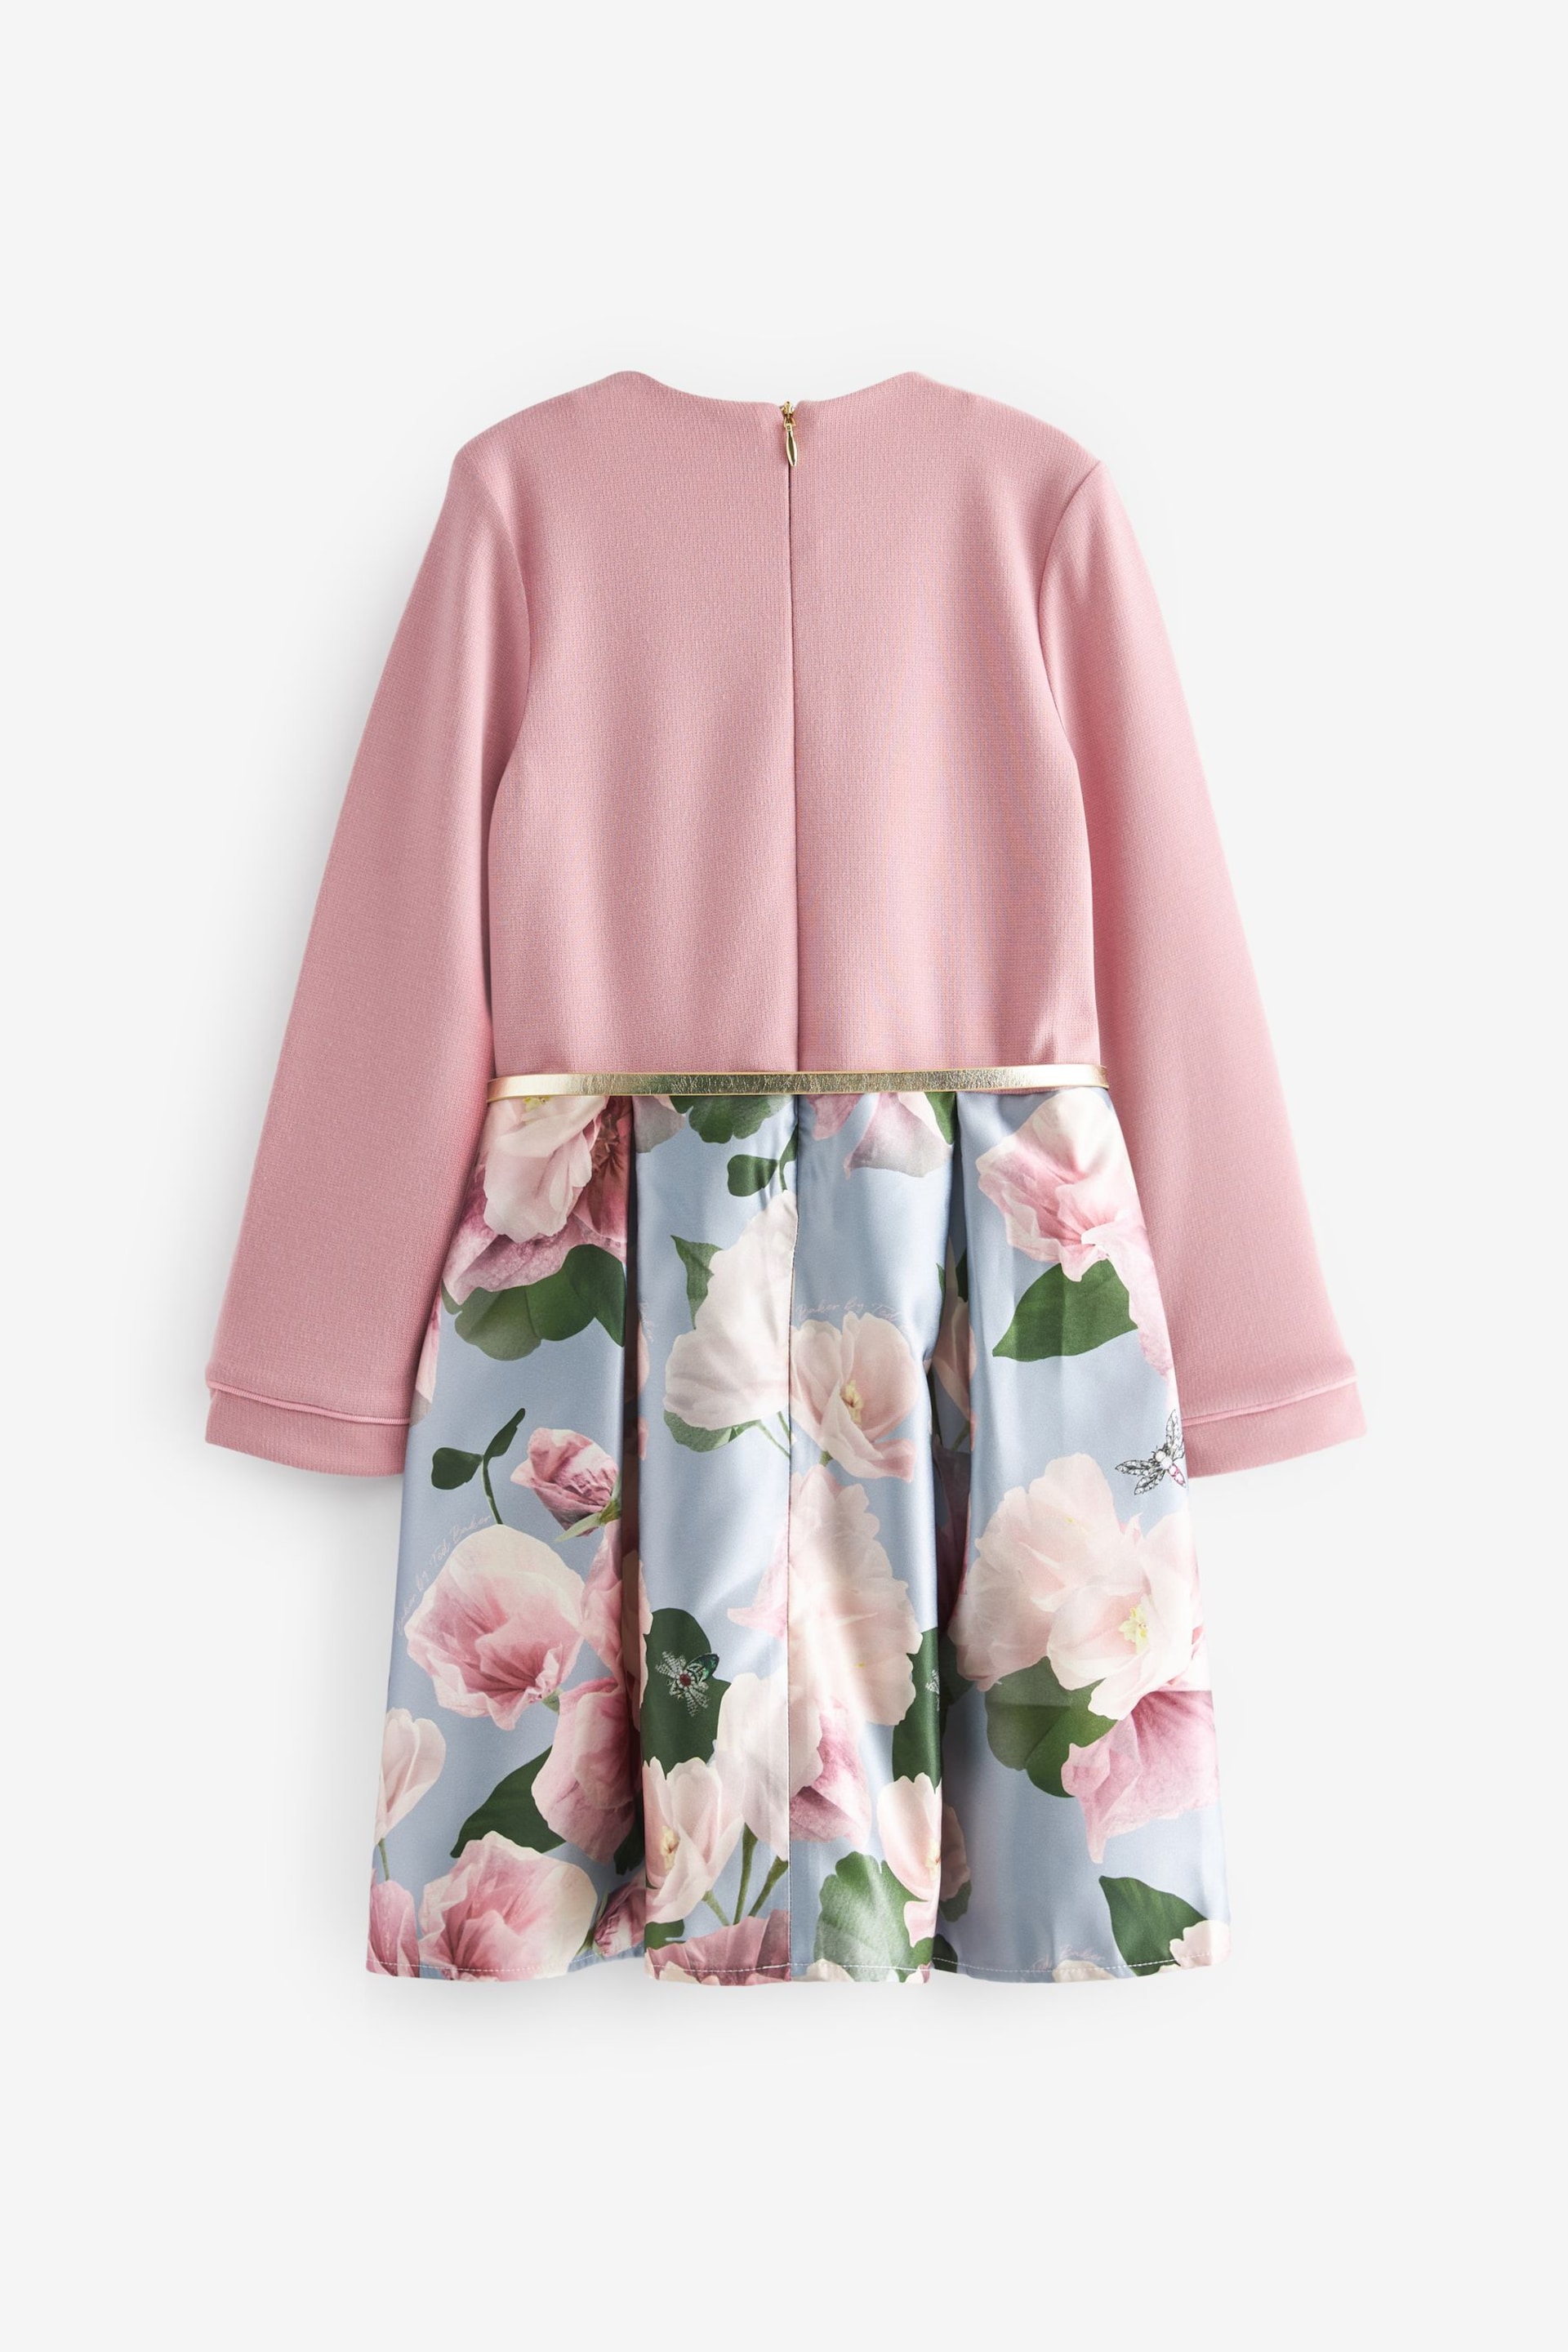 Baker by Ted Baker Pink Long Sleeve Floral Dress - Image 7 of 9